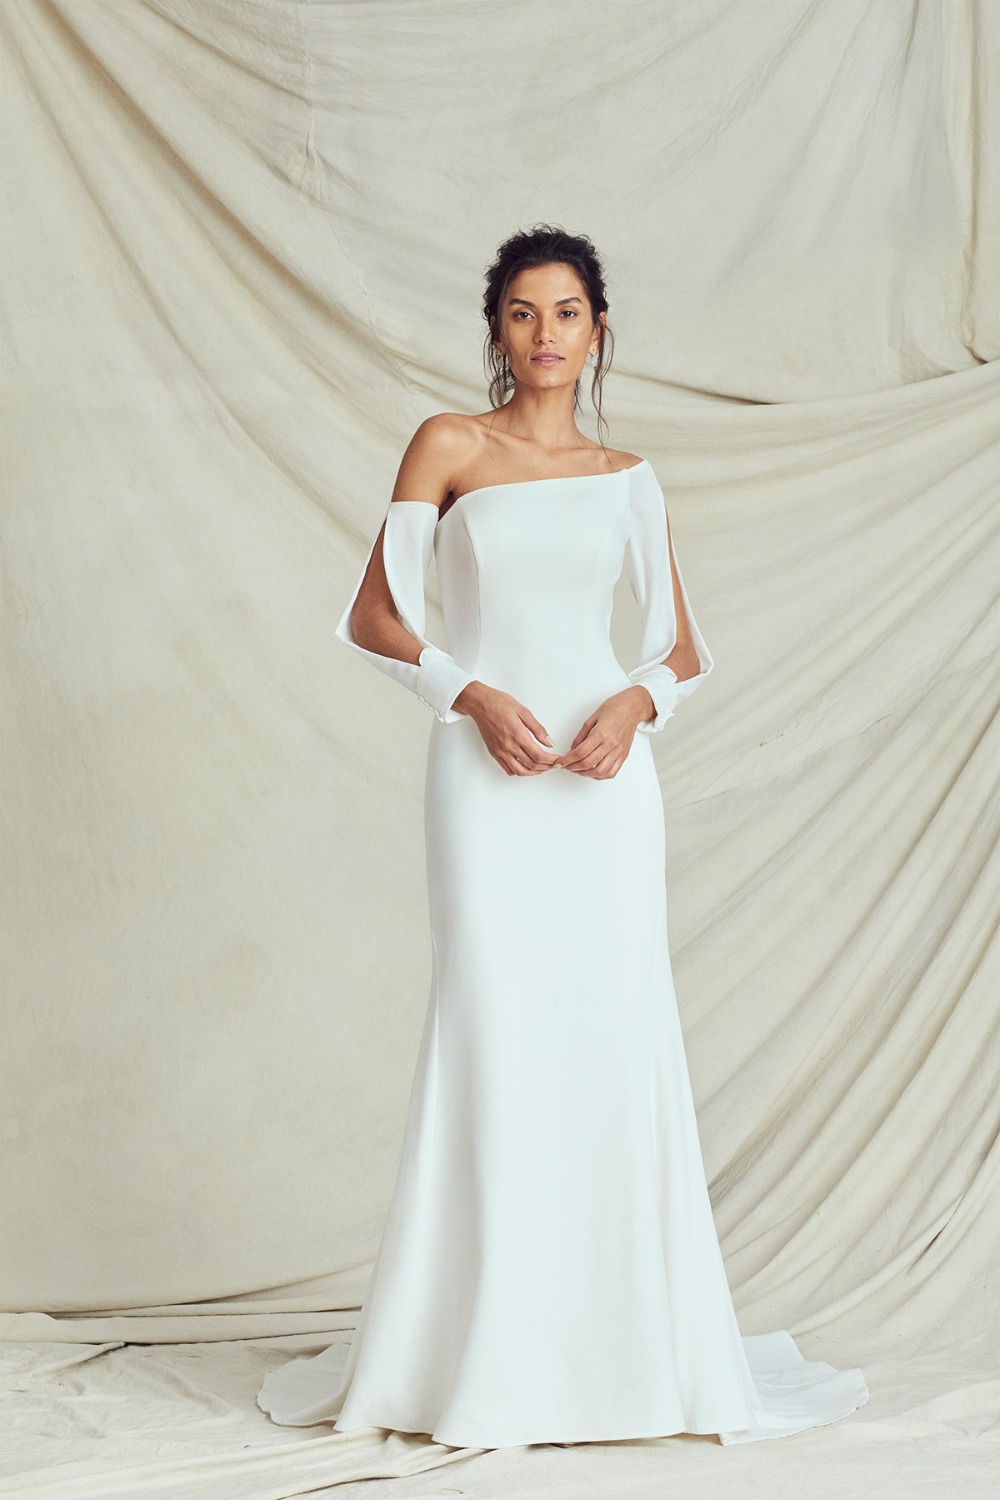 sleek gown with open sleeves by Kelly Faetanini